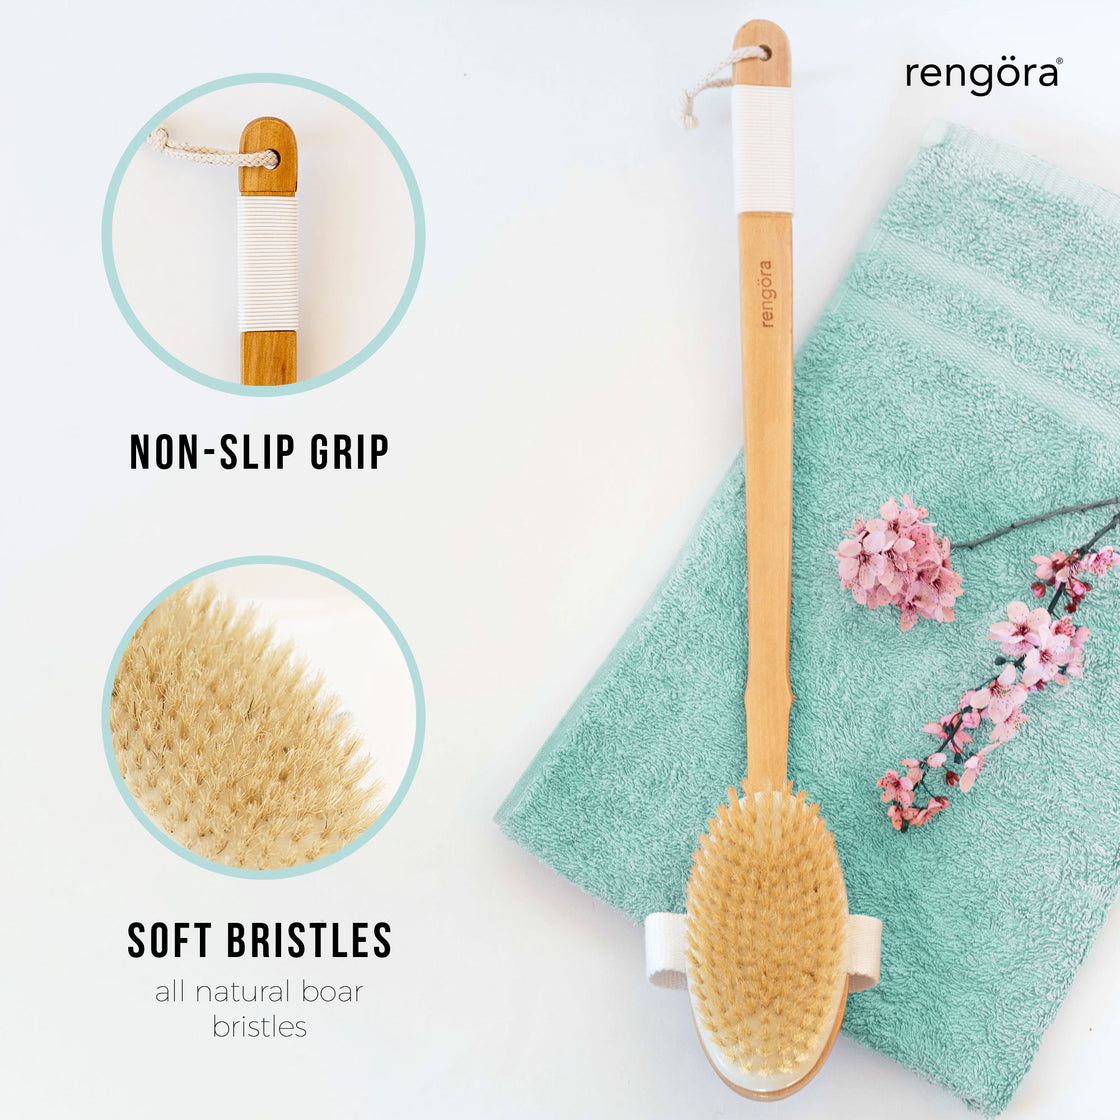 An overhead perspective of the rengora 20-inch back brush, highlighting the anti-slip grip and the gentle texture of its bristles